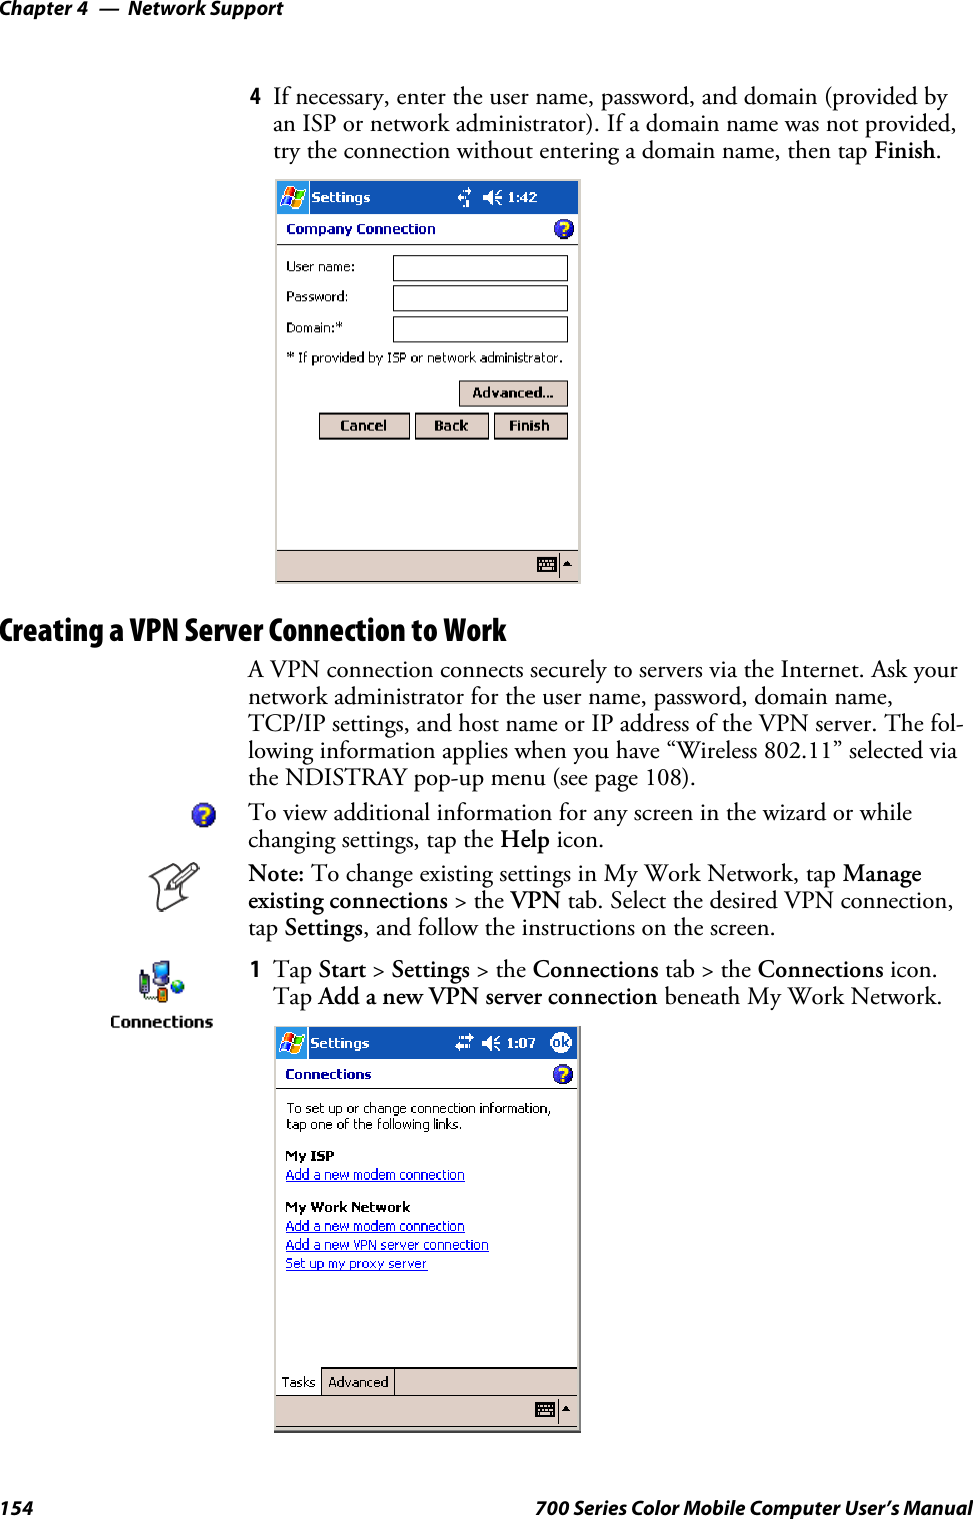 Network SupportChapter —4154 700 Series Color Mobile Computer User’s Manual4If necessary, enter the user name, password, and domain (provided byan ISP or network administrator). If a domain name was not provided,try the connection without entering a domain name, then tap Finish.Creating a VPN Server Connection to WorkA VPN connection connects securely to servers via the Internet. Ask yournetwork administrator for the user name, password, domain name,TCP/IP settings, and host name or IP address of the VPN server. The fol-lowing information applies when you have “Wireless 802.11” selected viathe NDISTRAY pop-up menu (see page 108).To view additional information for any screen in the wizard or whilechanging settings, tap the Help icon.Note: To change existing settings in My Work Network, tap Manageexisting connections &gt;theVPN tab. Select the desired VPN connection,tap Settings, and follow the instructions on the screen.1Tap Start &gt;Settings &gt;theConnections tab&gt;theConnections icon.Tap Add a new VPN server connection beneath My Work Network.